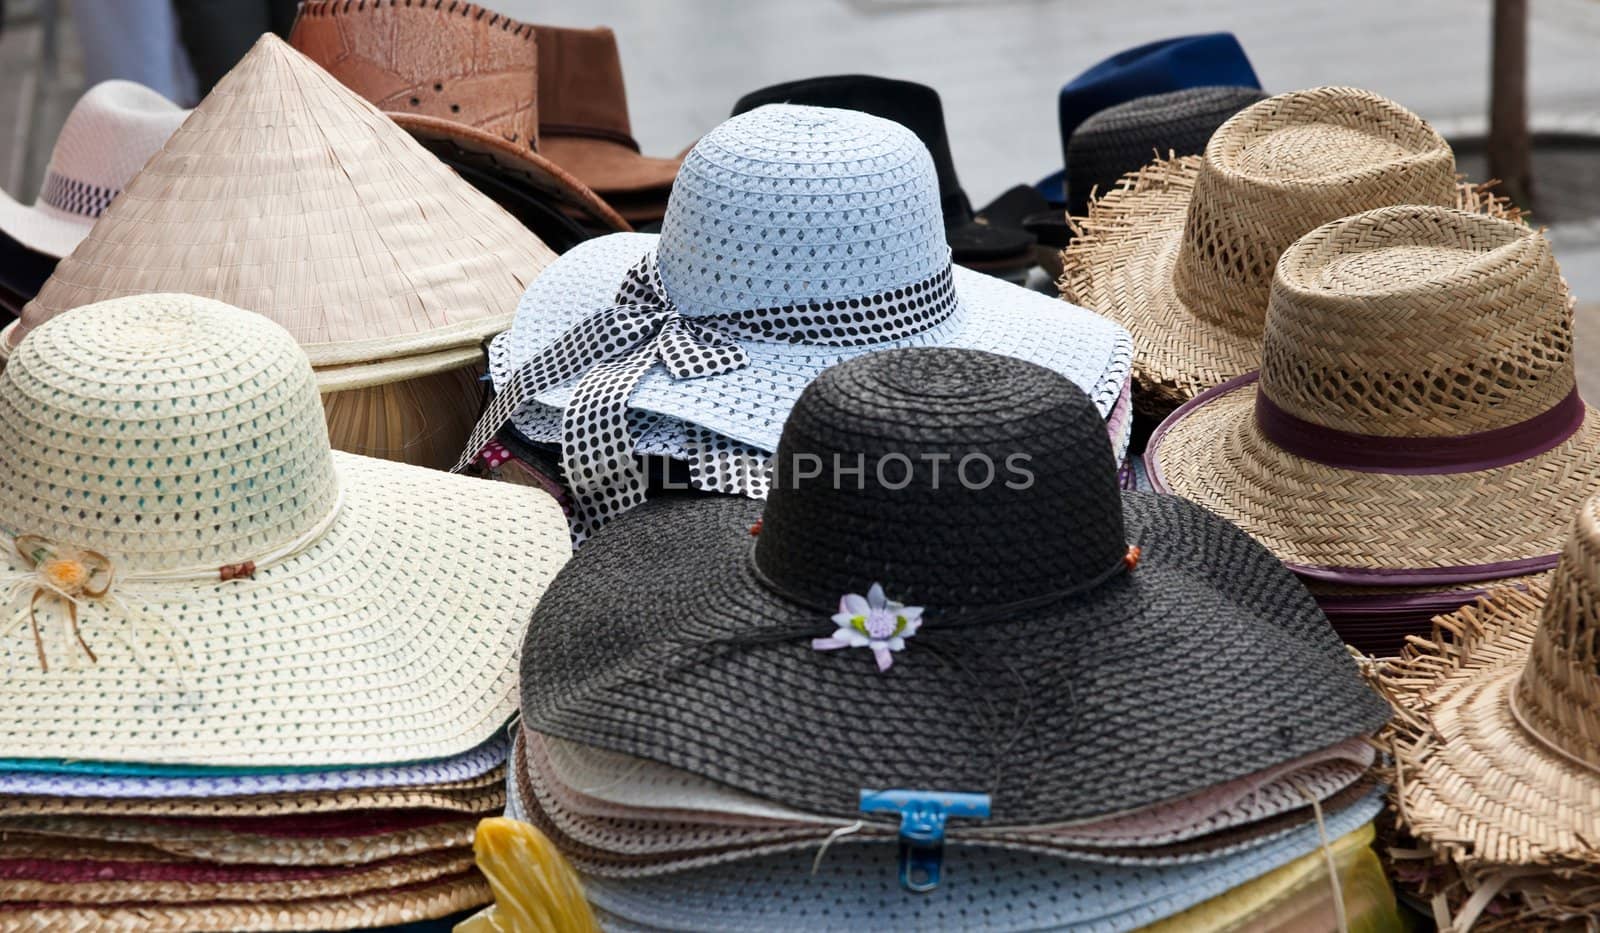 lots of hats for sale in market focus is on blue hat